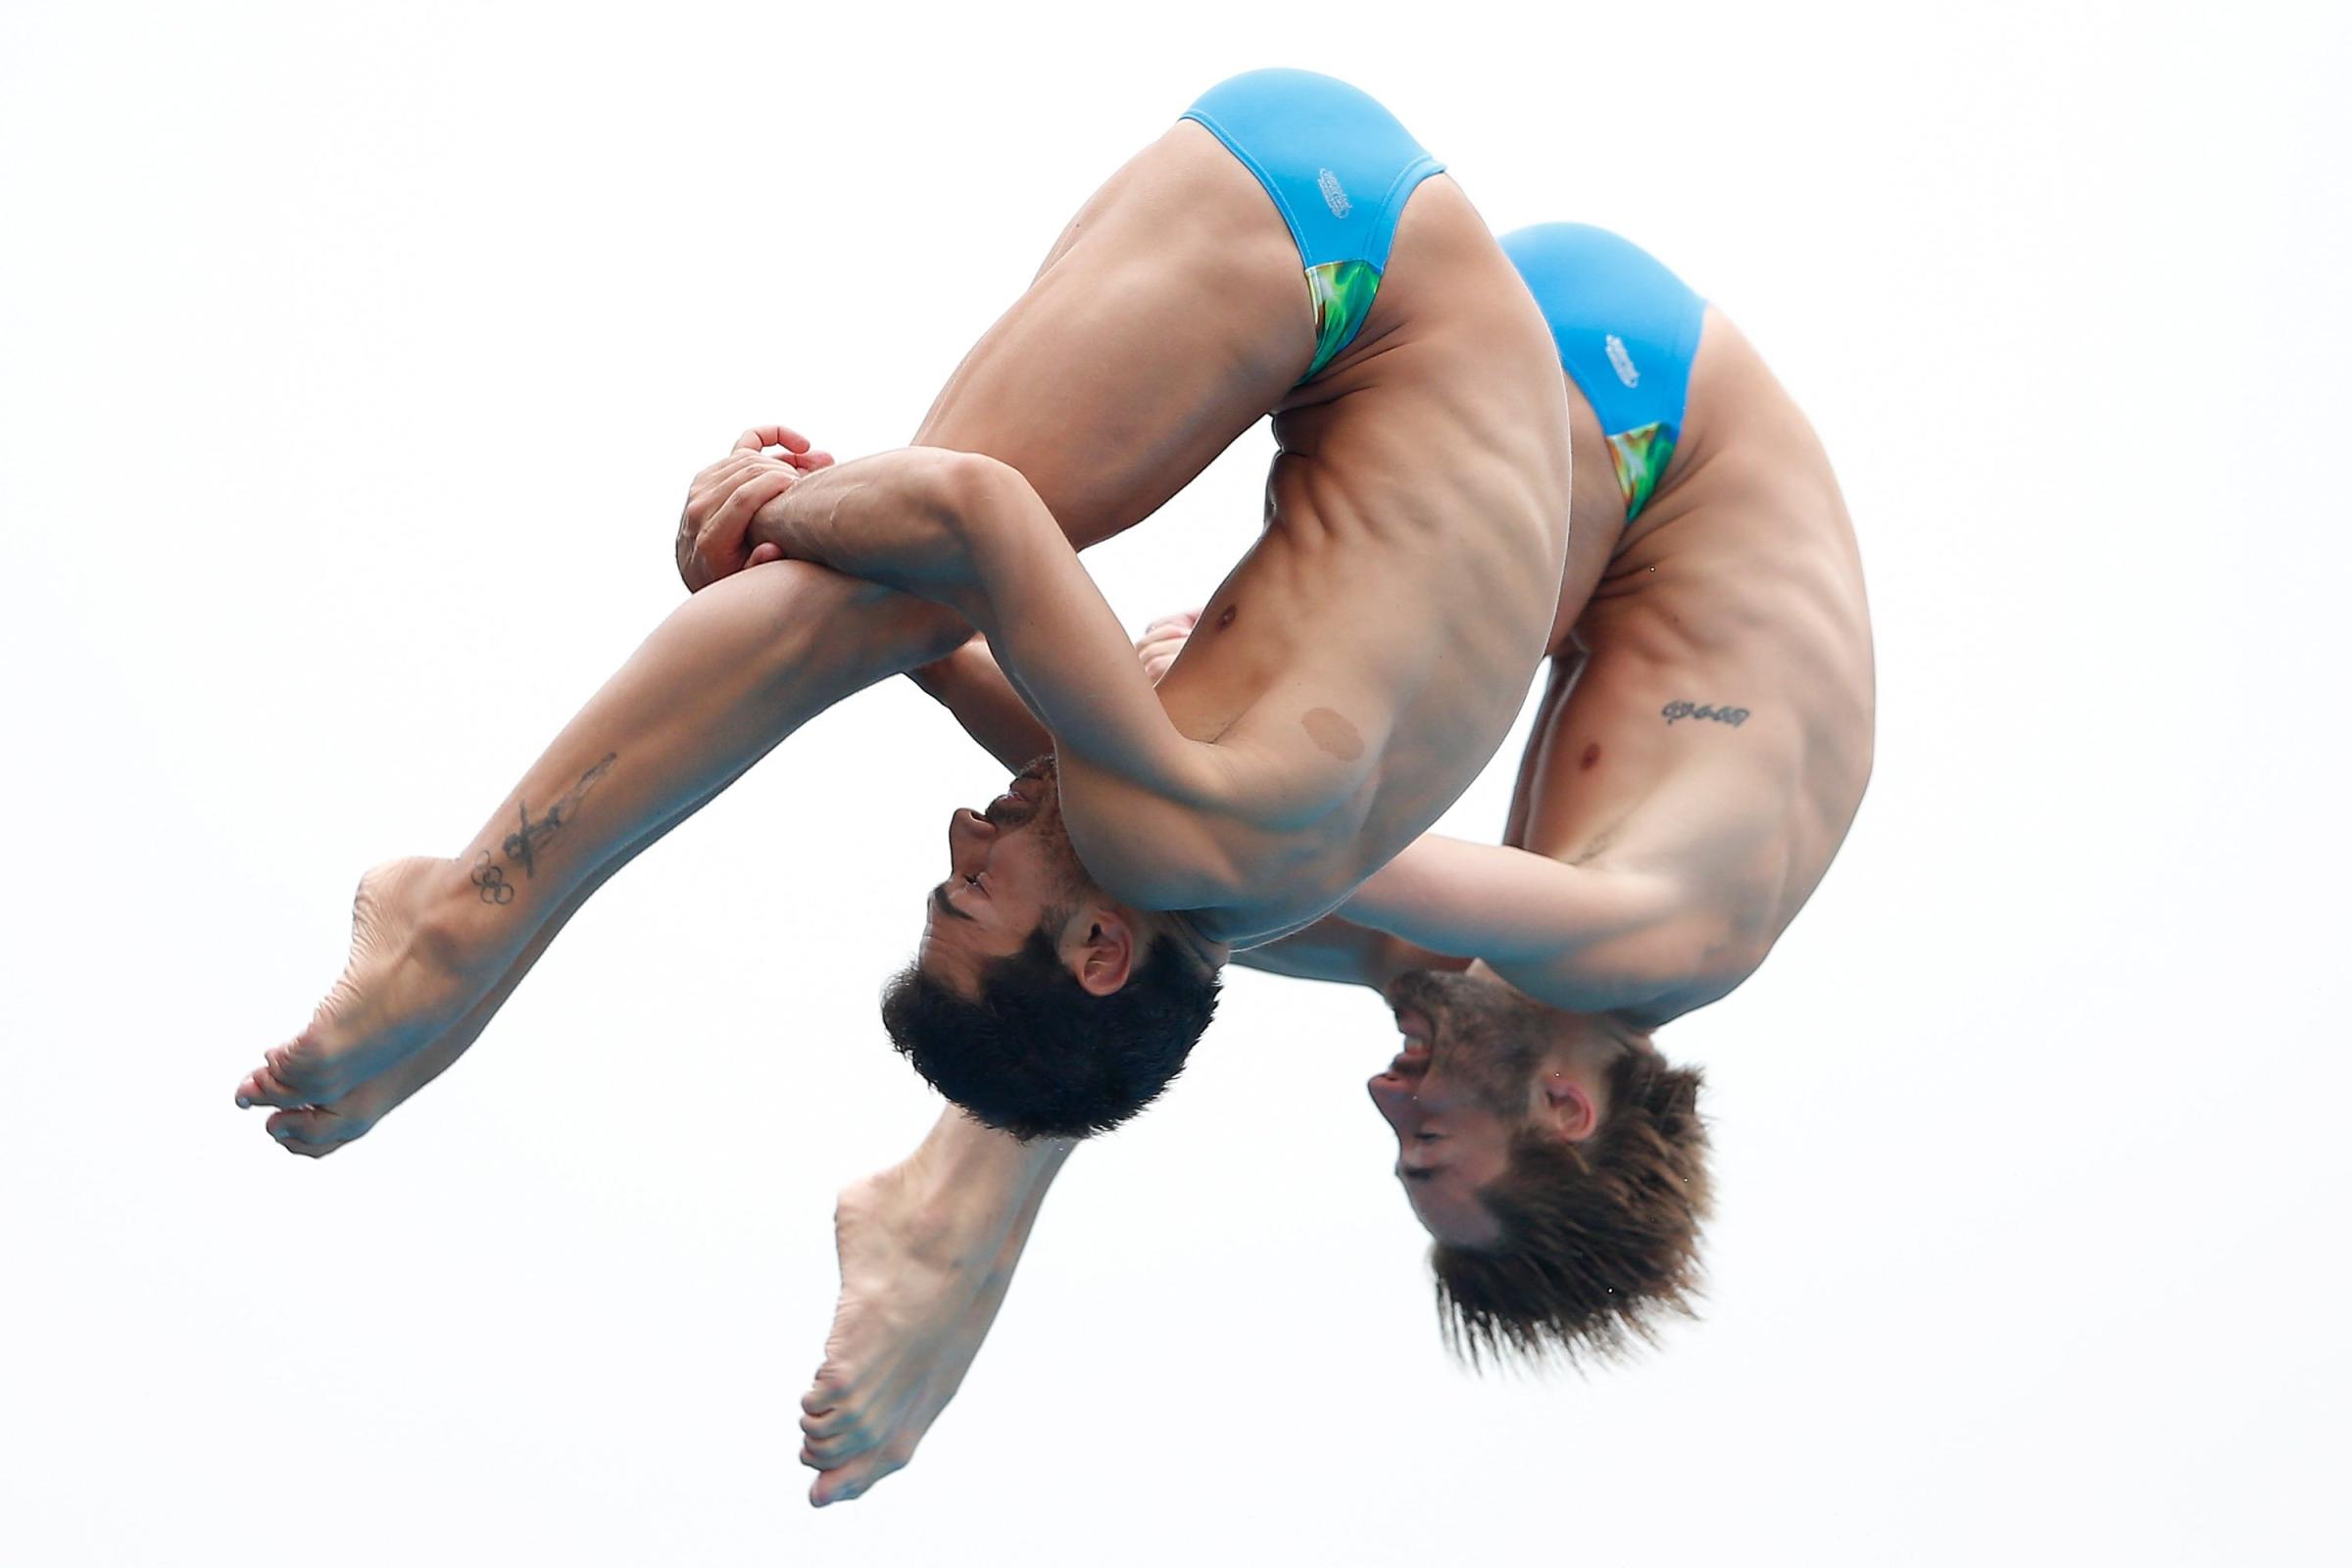 19th FINA Diving World Cup